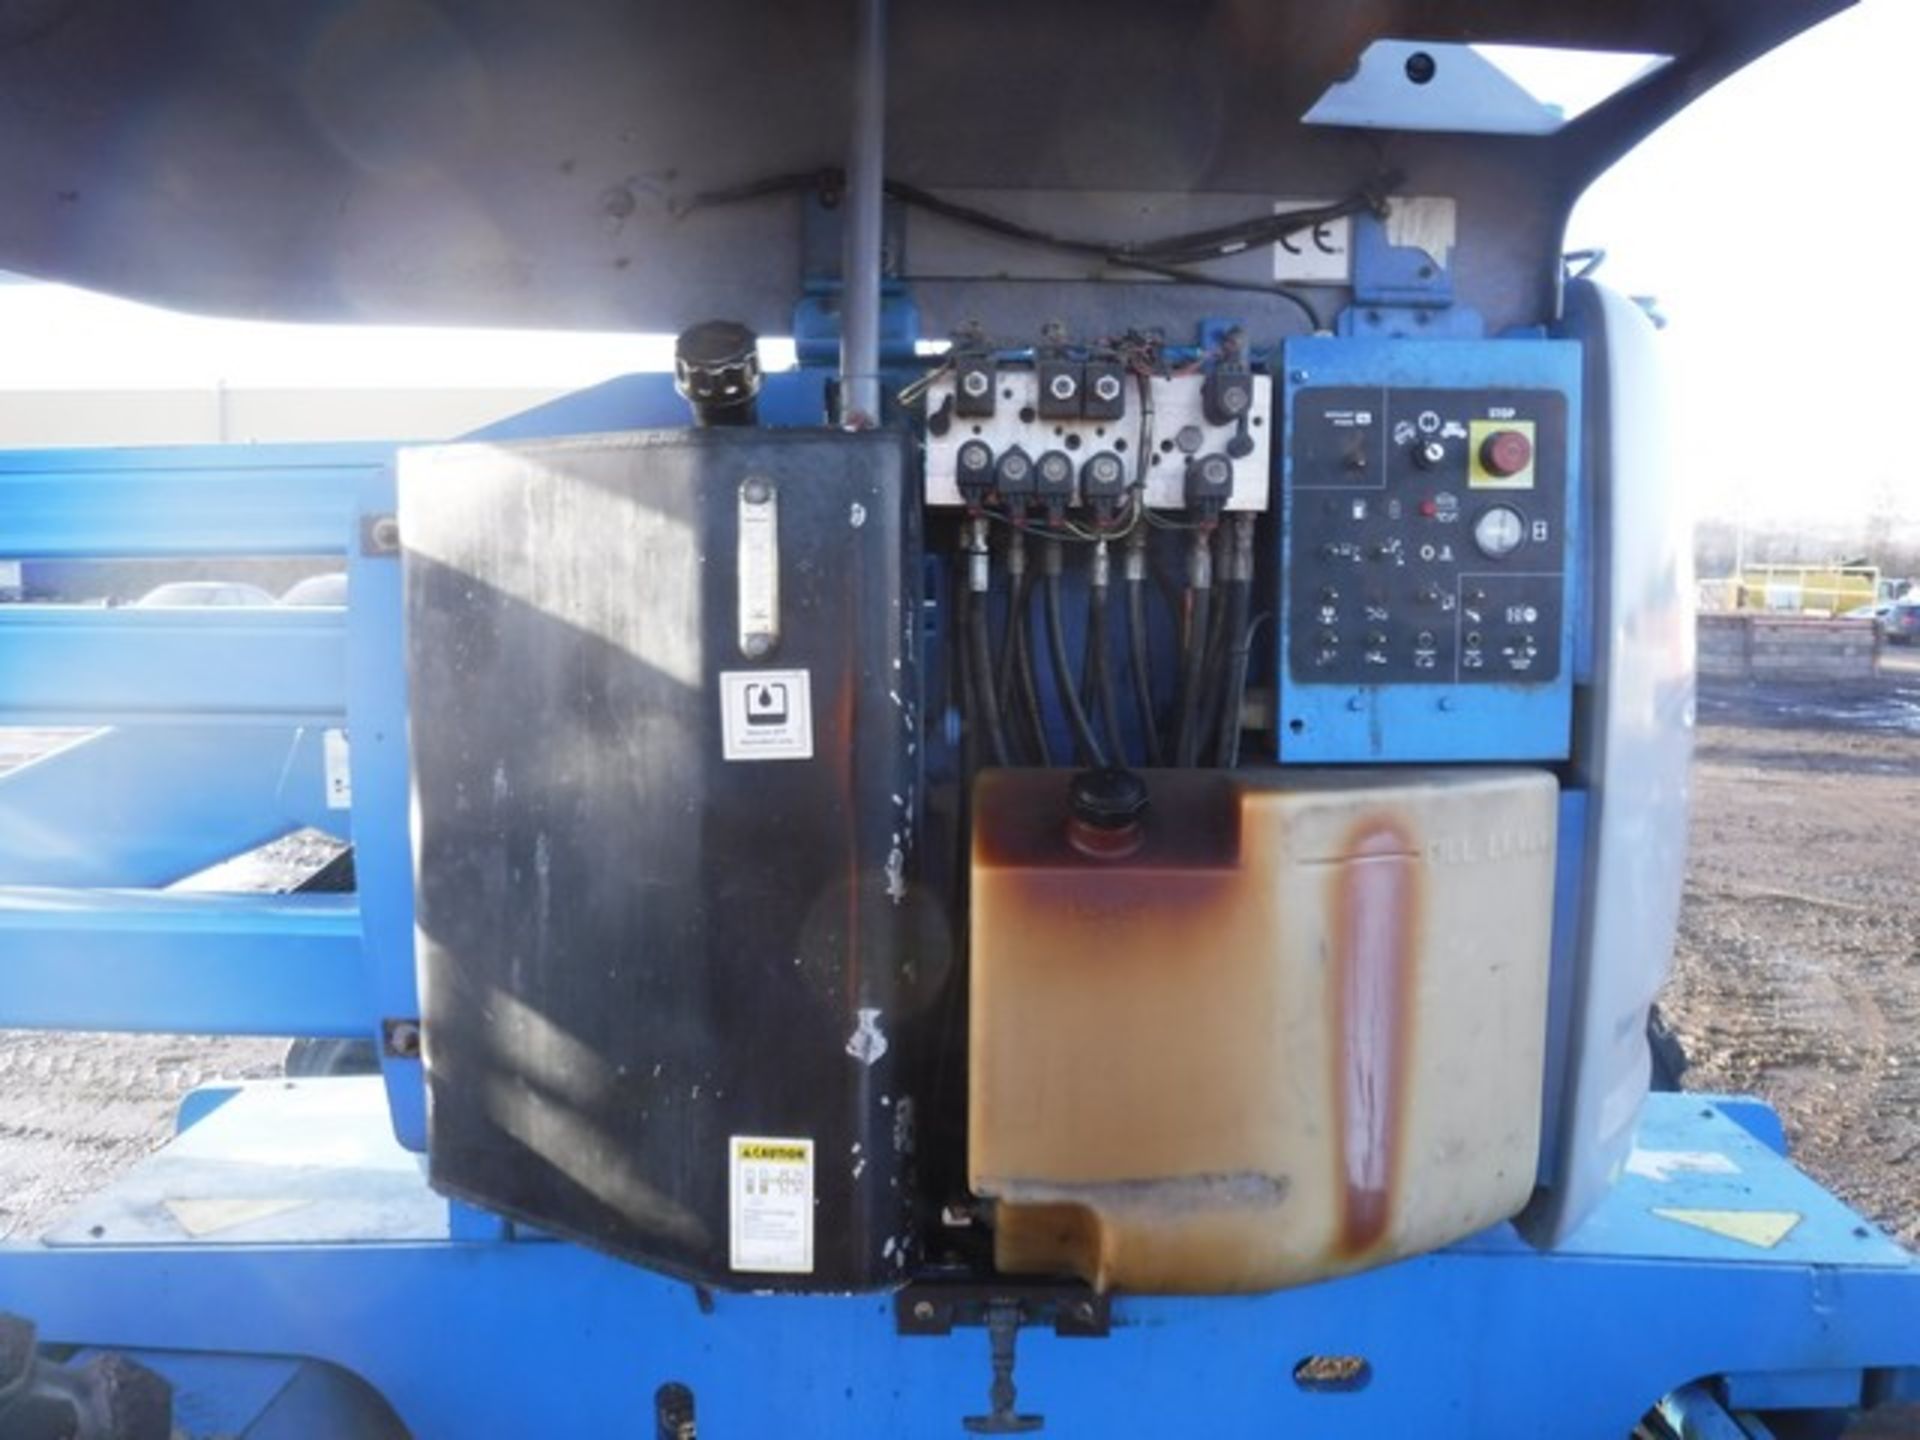 2000 GENIE MODEL Z45-25, S/N 15155, 8046HRS (NOT VERIFIED), LIFT CAPACITY - 230 - Image 3 of 17